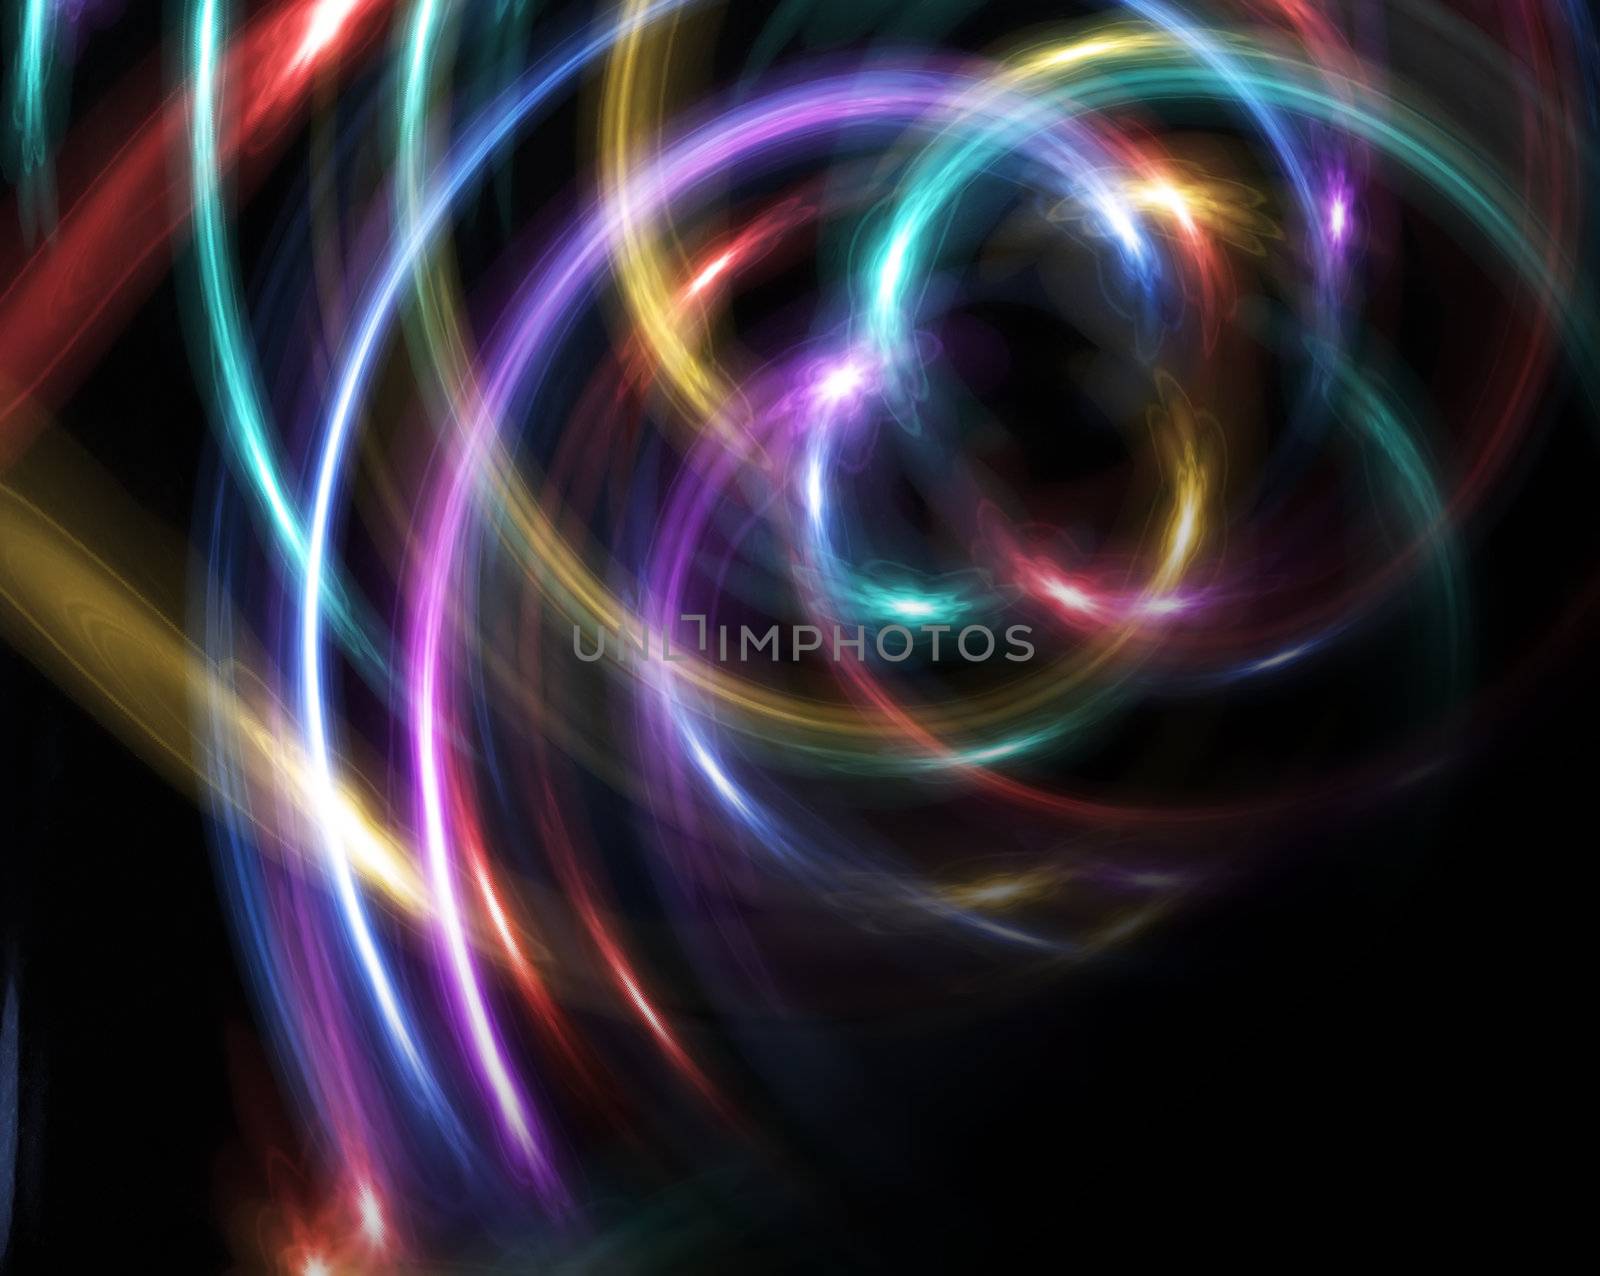 It is a colorful beautiful abstract background.